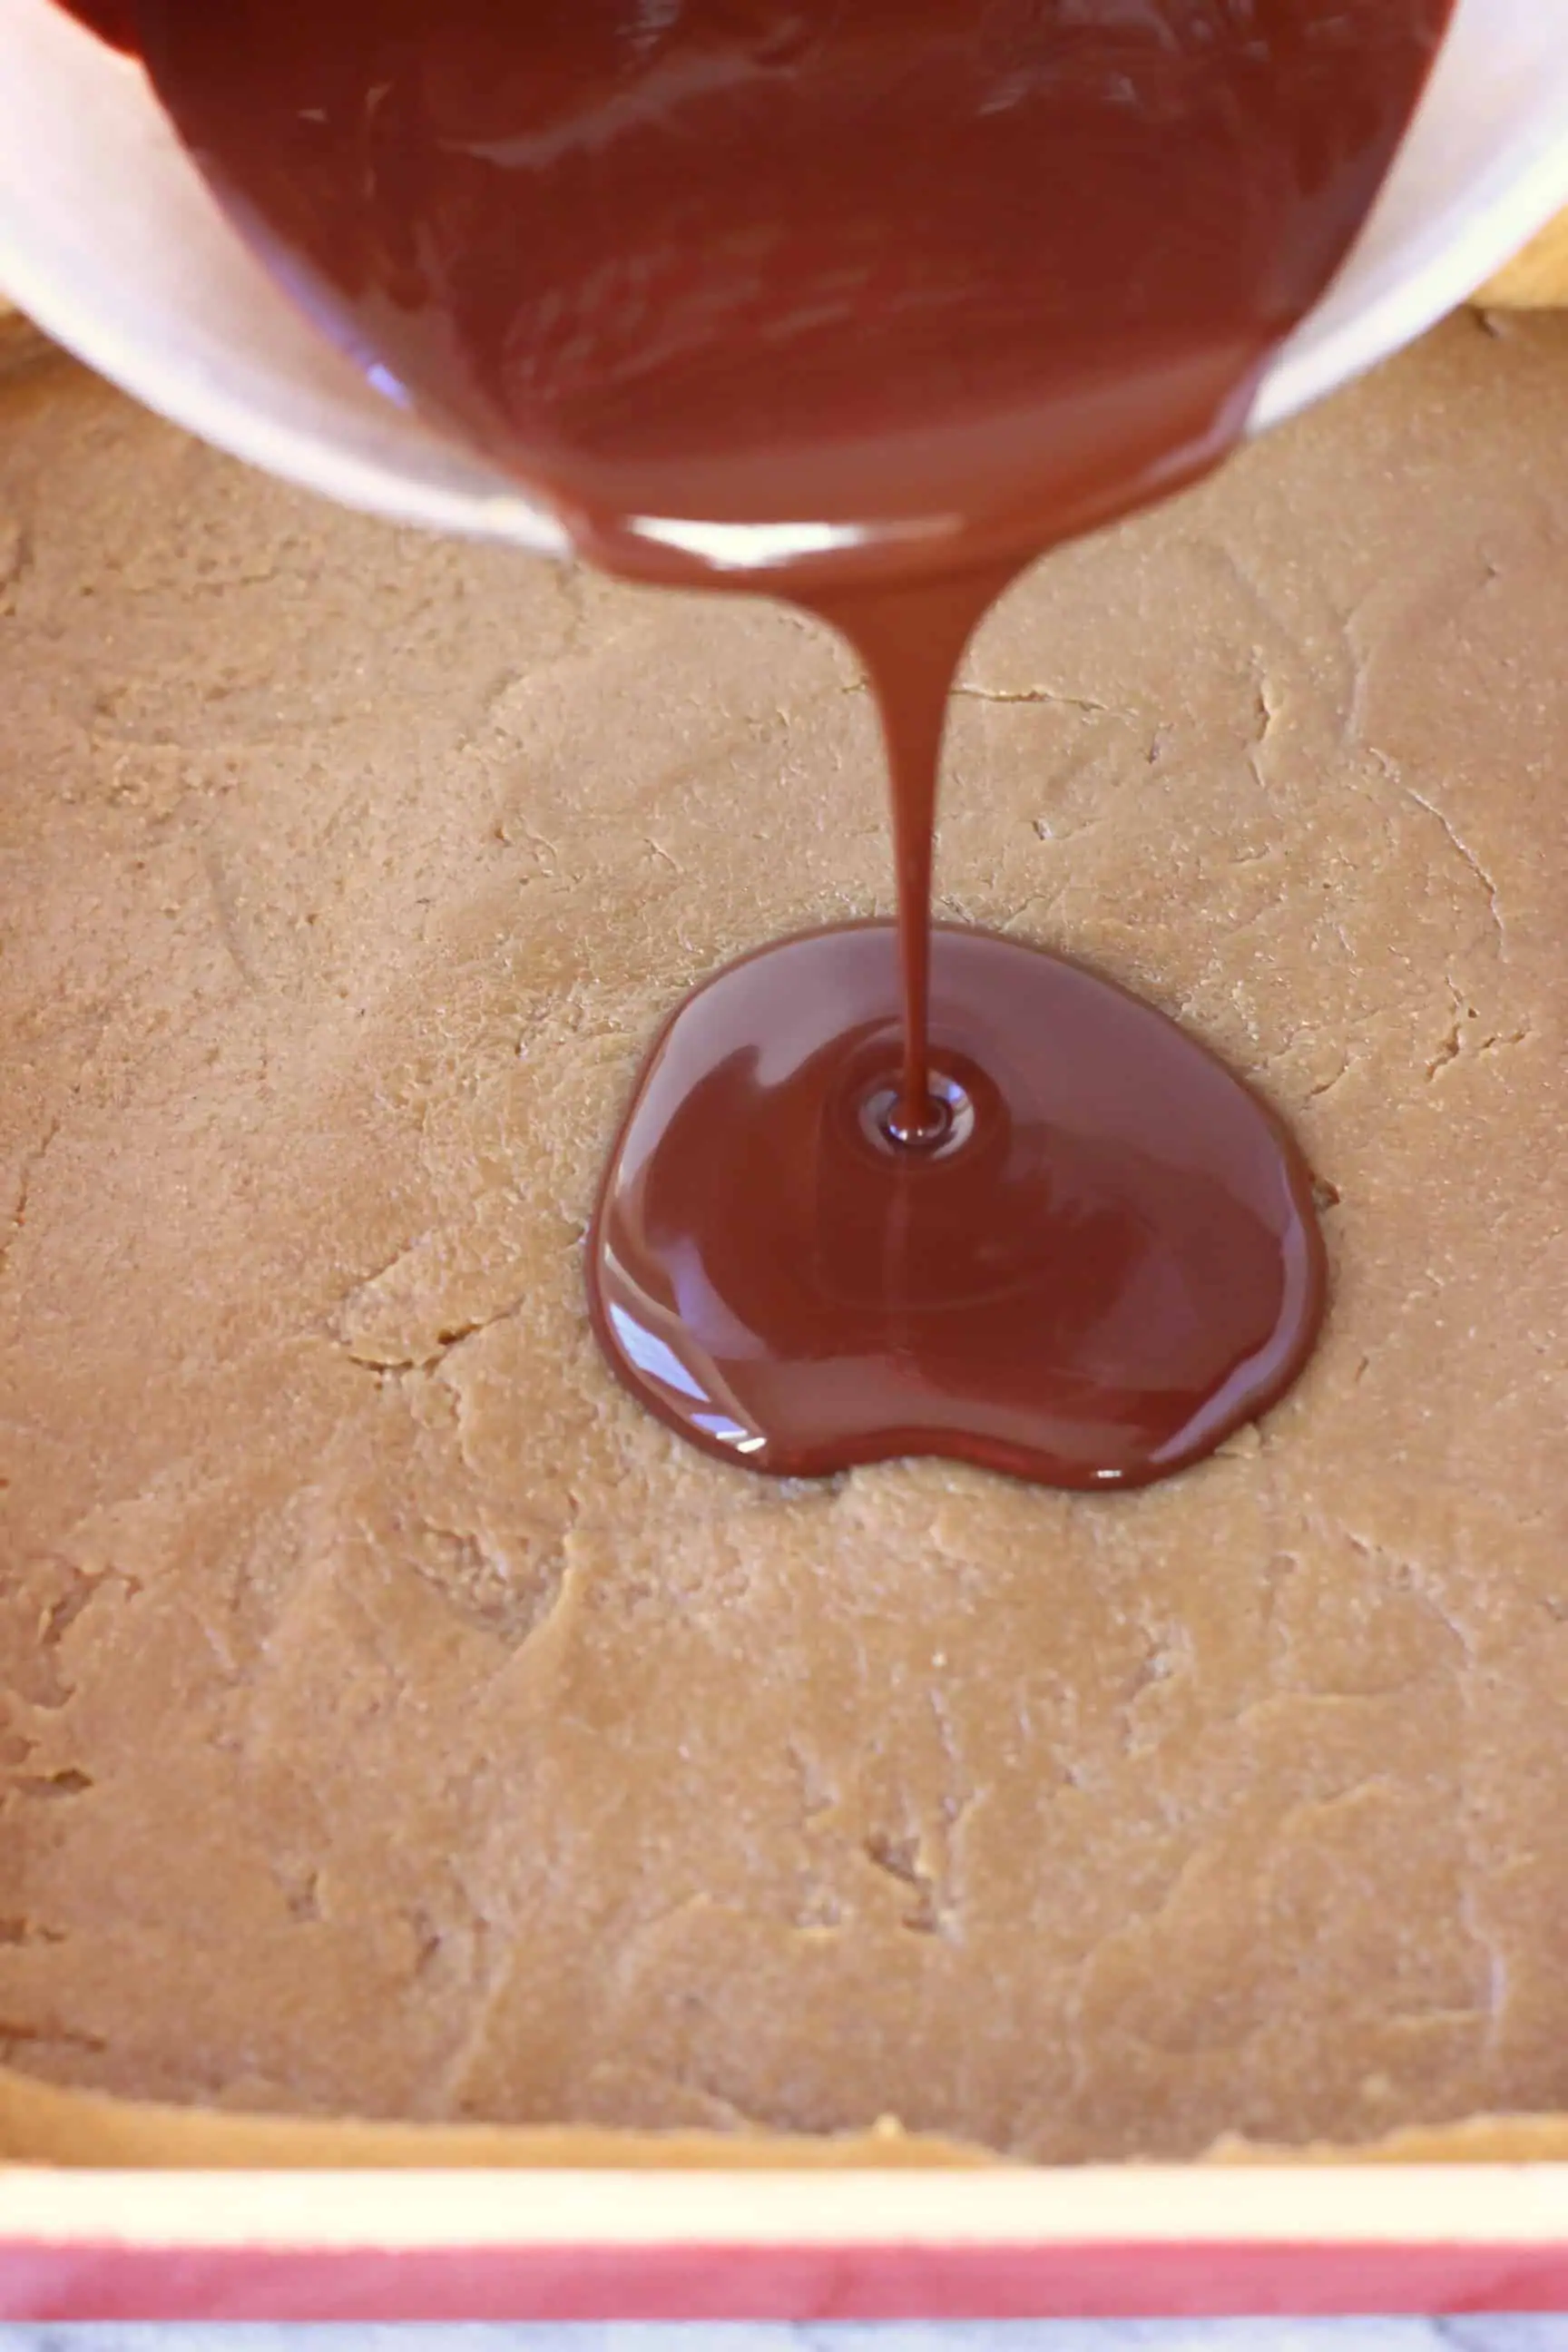 Melted chocolate being poured over a layer of vegan caramel